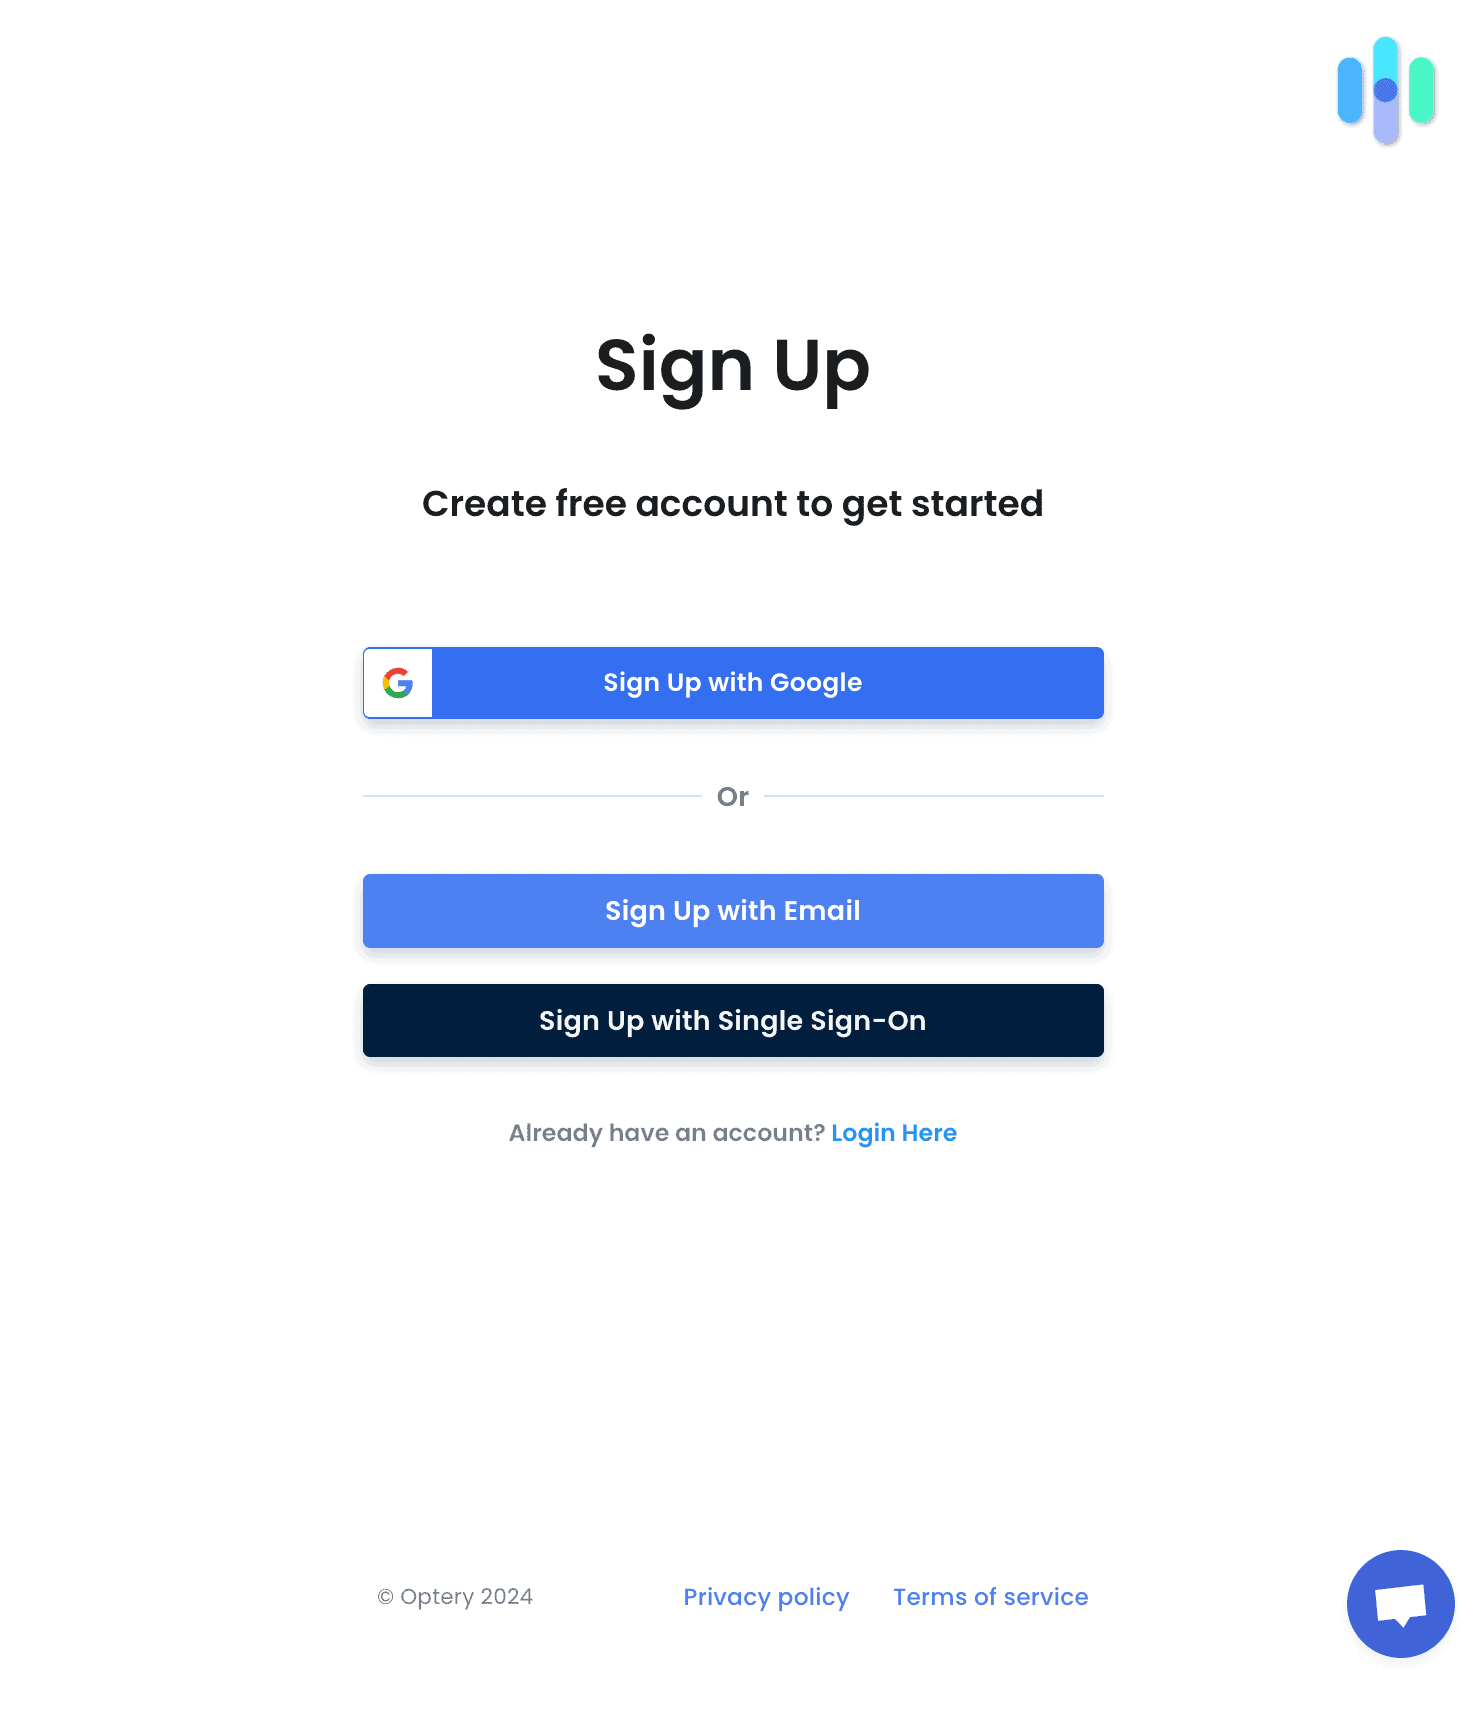 Optery sign up options